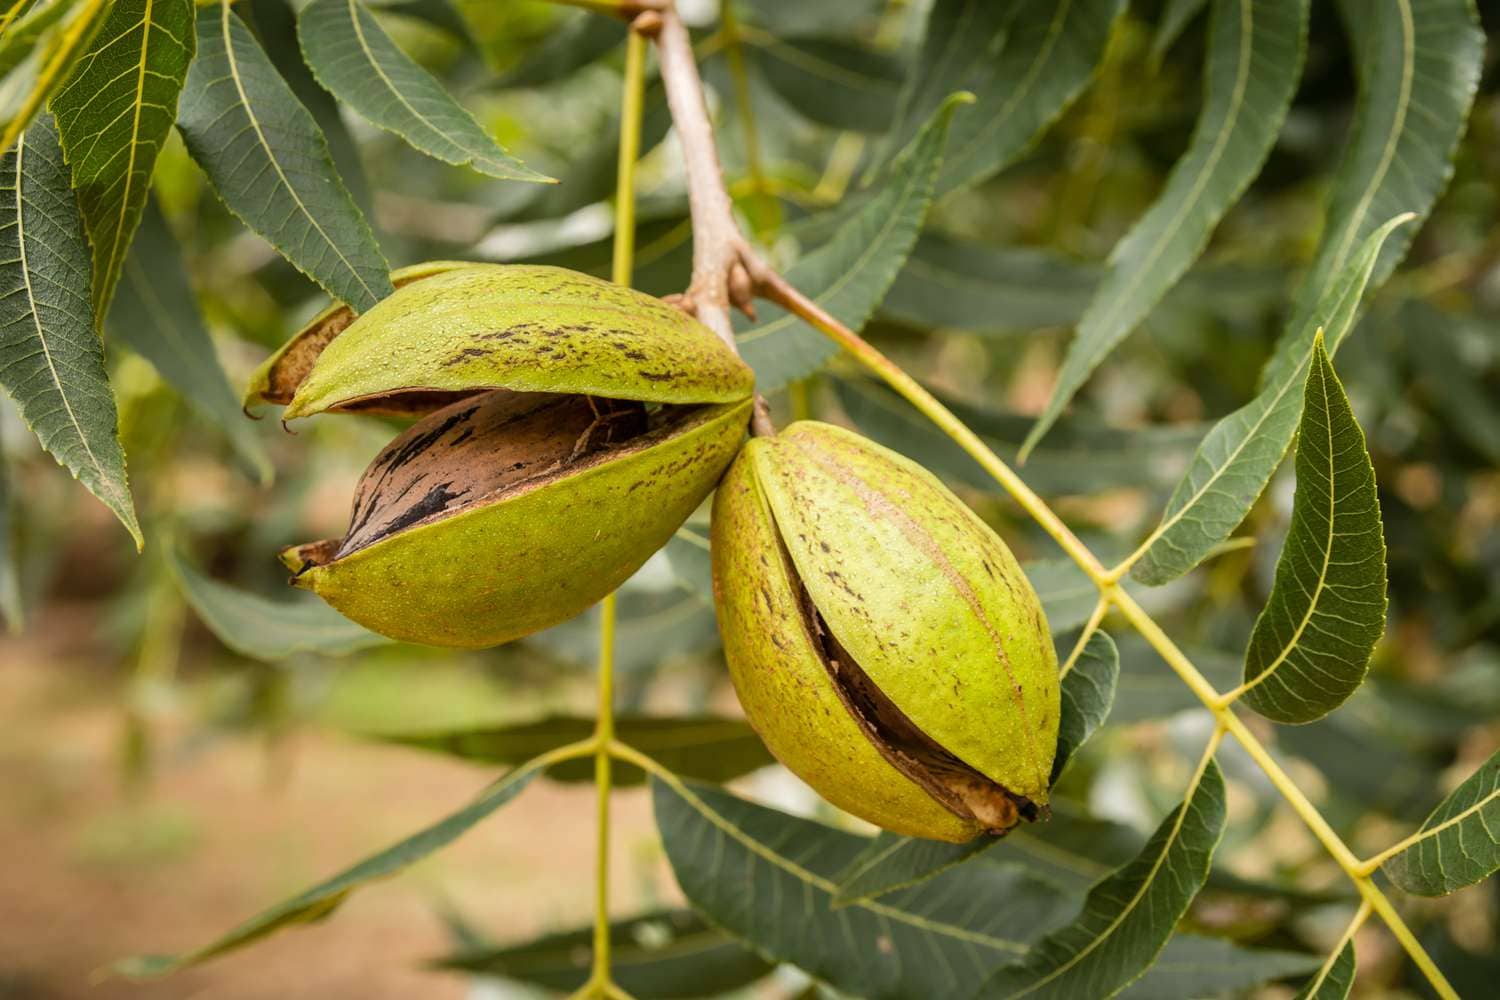 The pecan nut grows on a tree